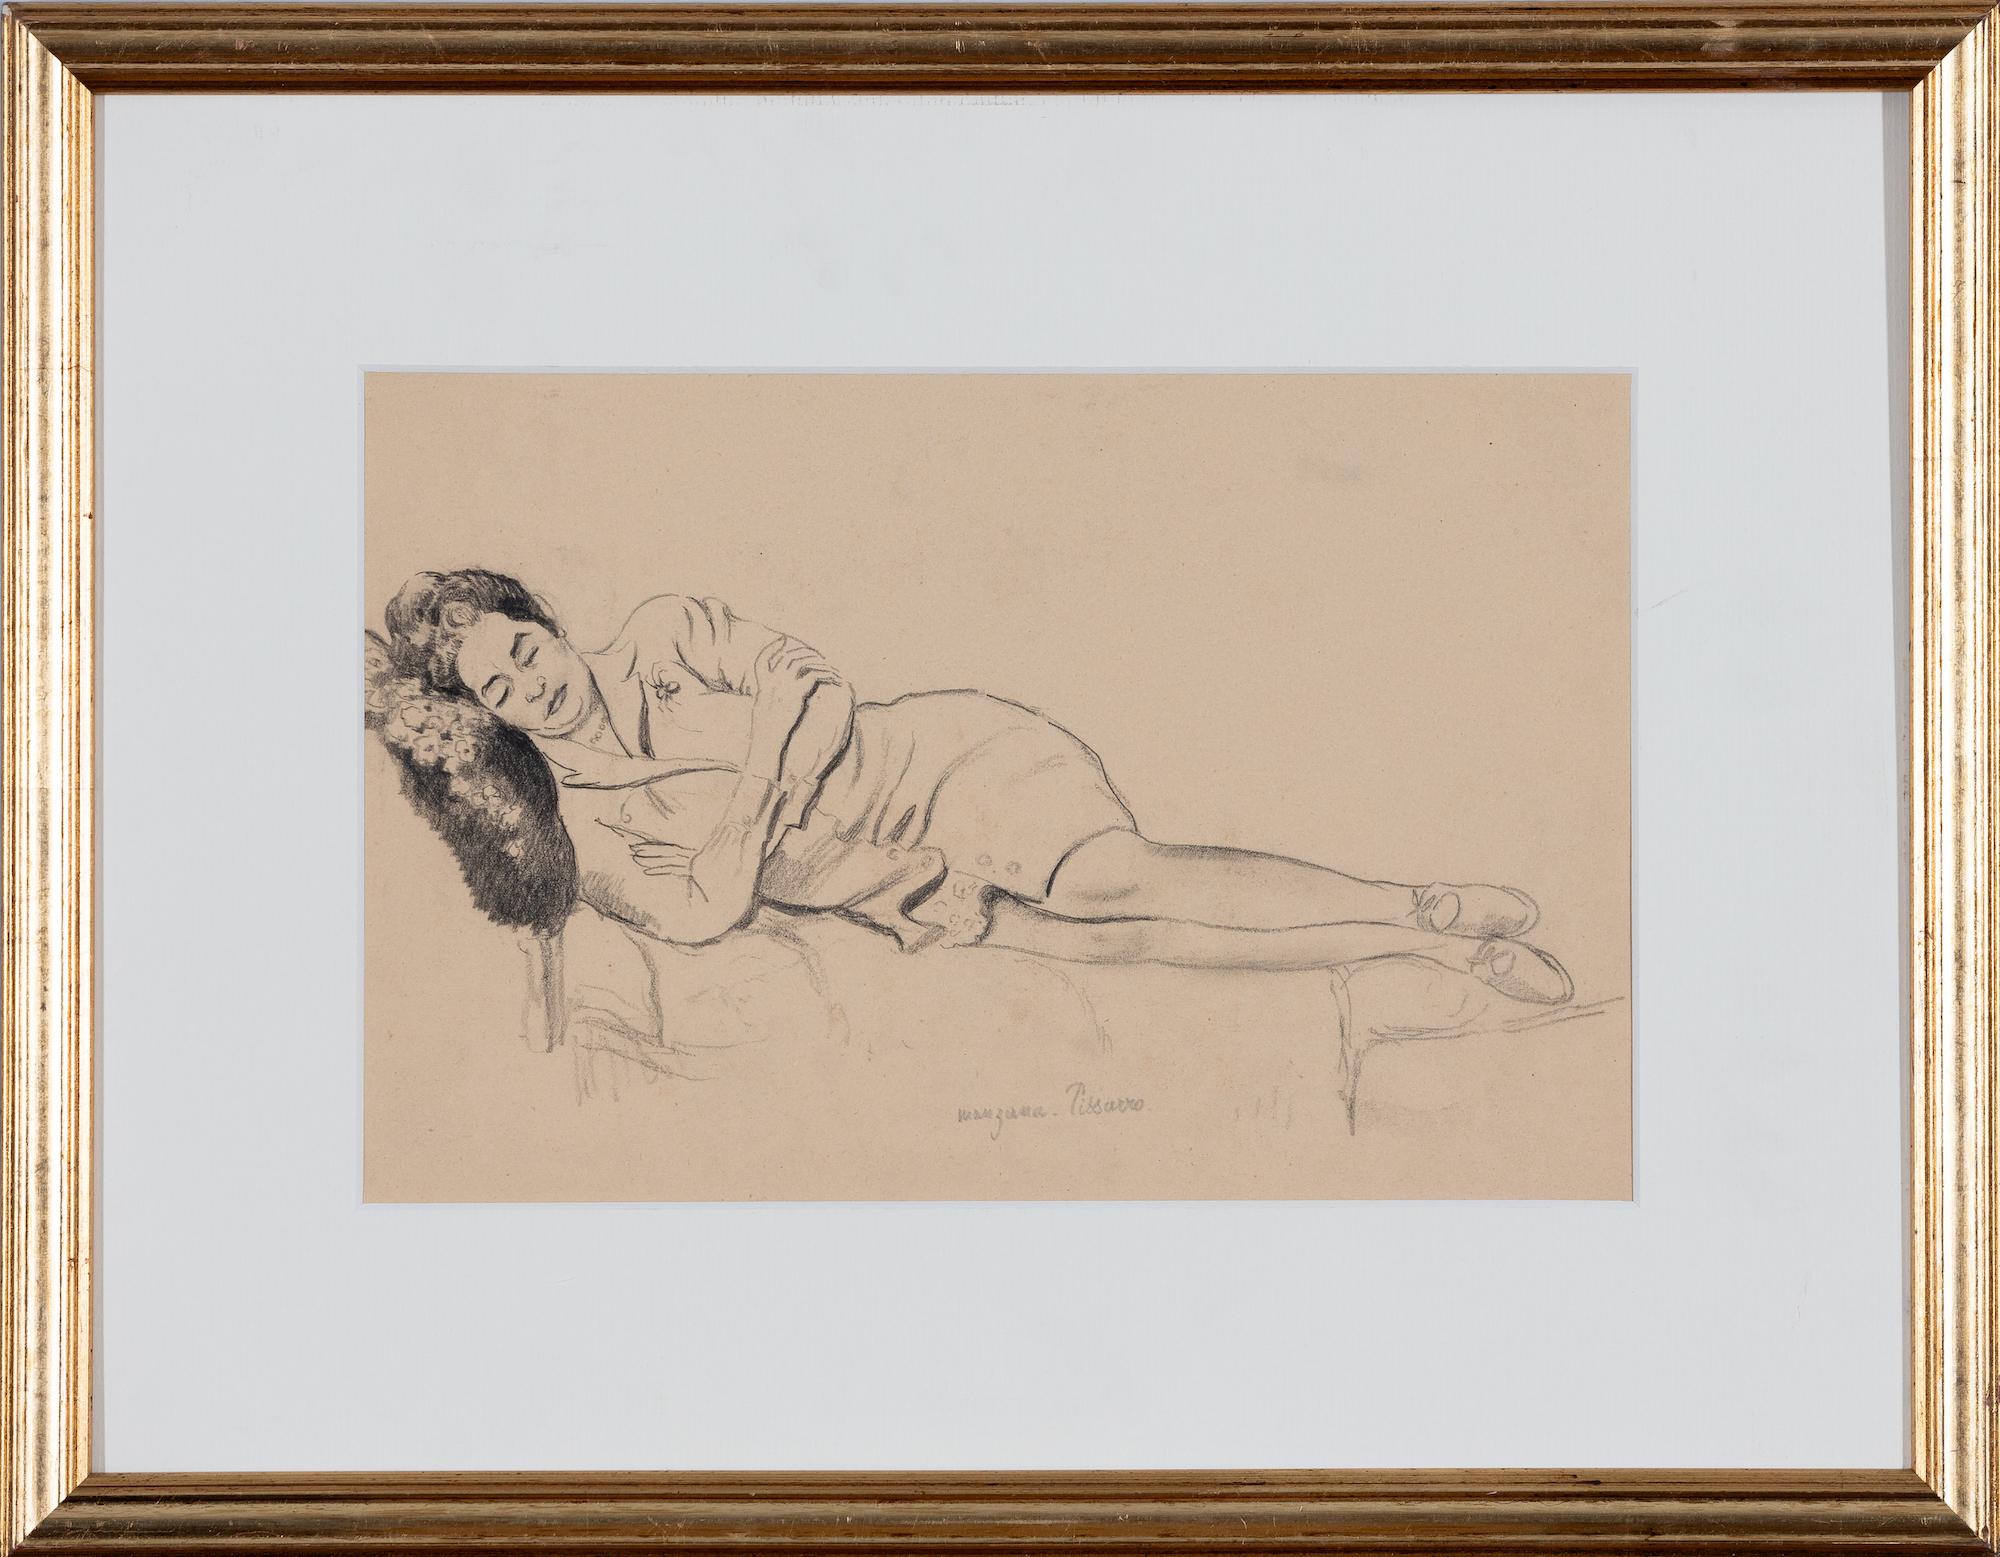 Roboa Sleeping (The Artist's Wife) by Georges Manzana Pissarro (1871-1961)
Charcoal on paper
20.4 x 31.2 cm (8 x 12 ¼ inches)
Signed lower centre, manzana. Pissarro

This work is accompanied by a certificate of authenticity from Lélia Pissarro.